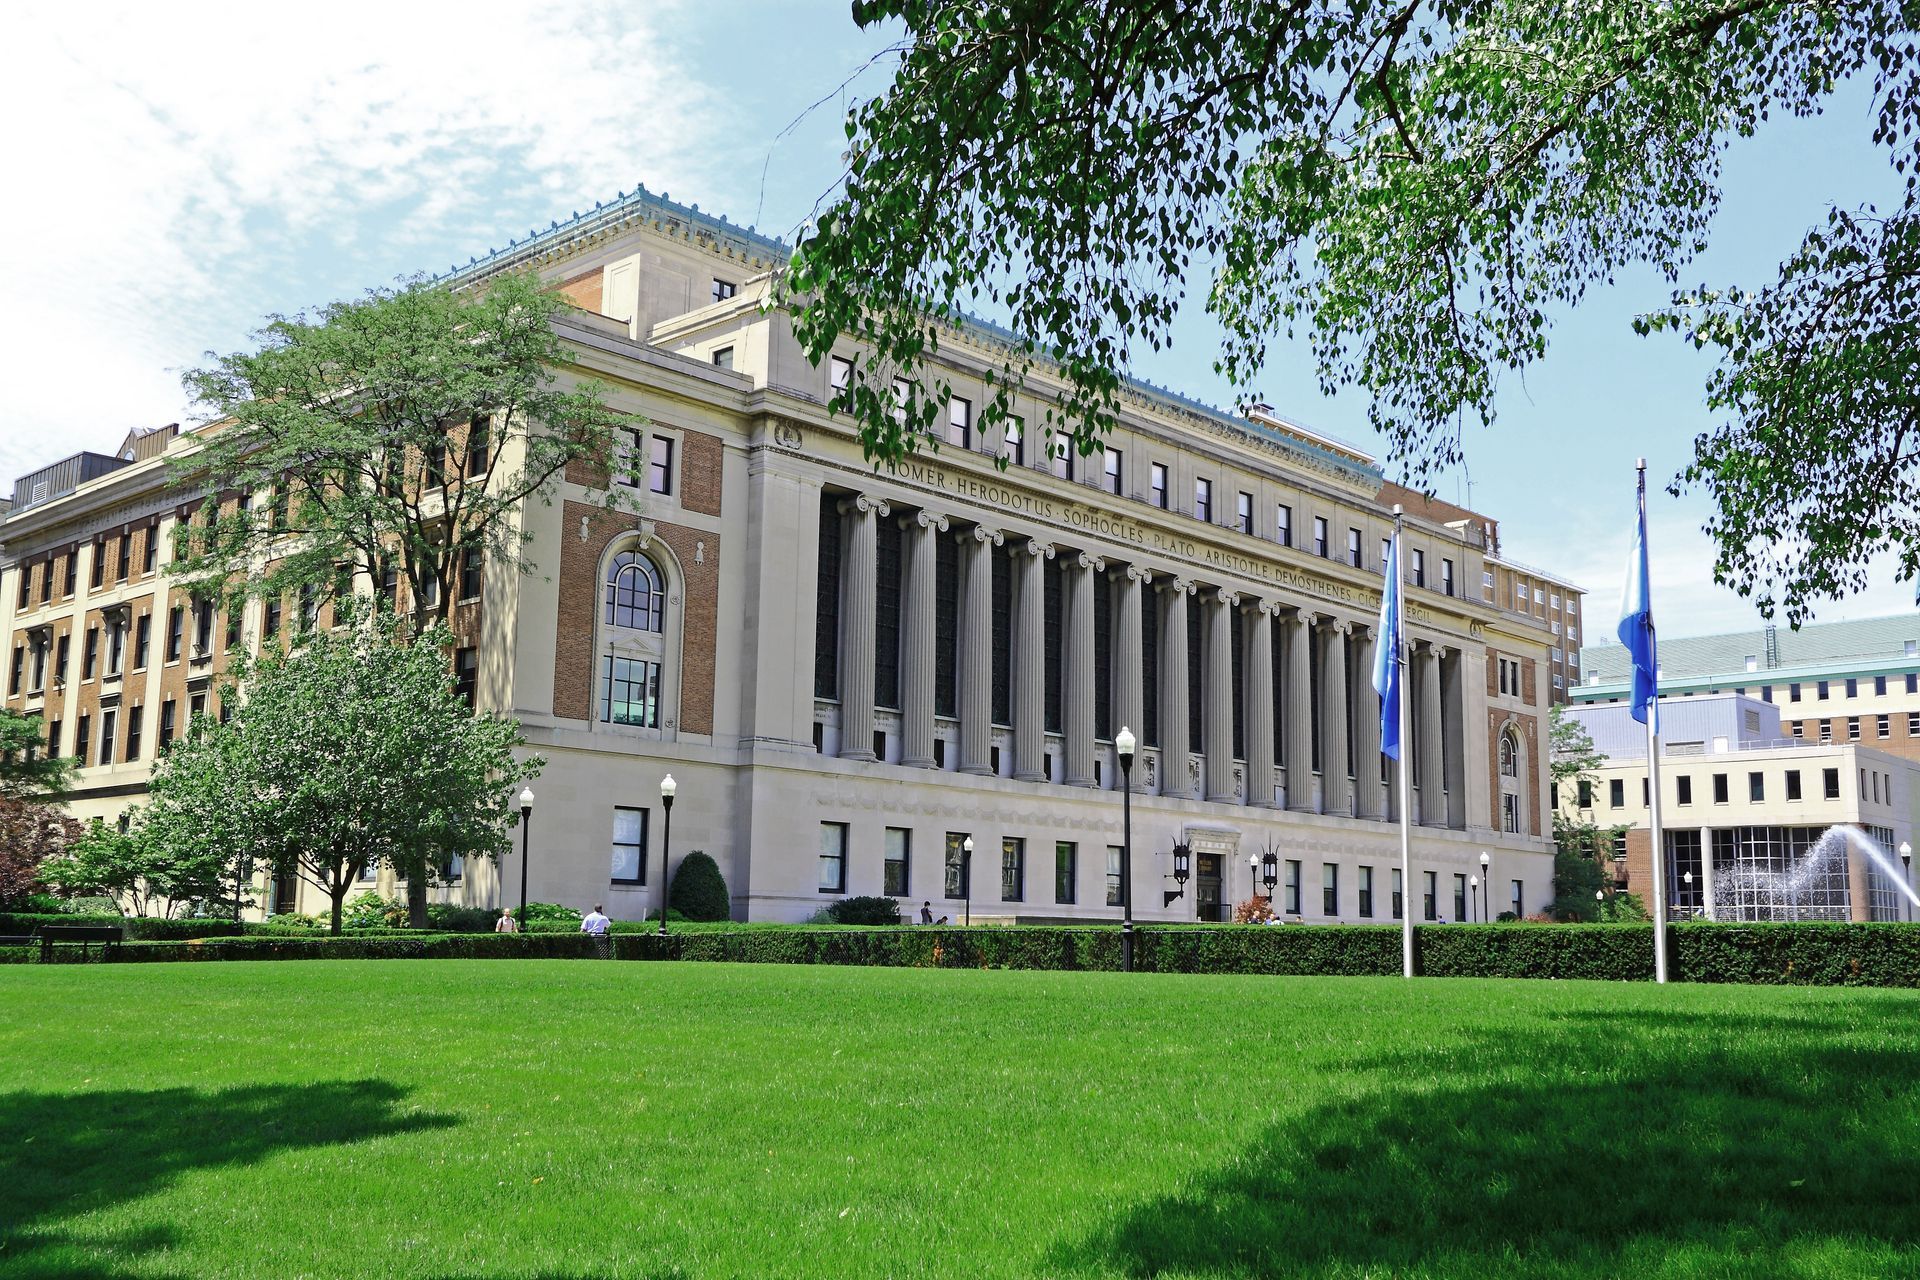 a large building with columns is surrounded by grass and trees